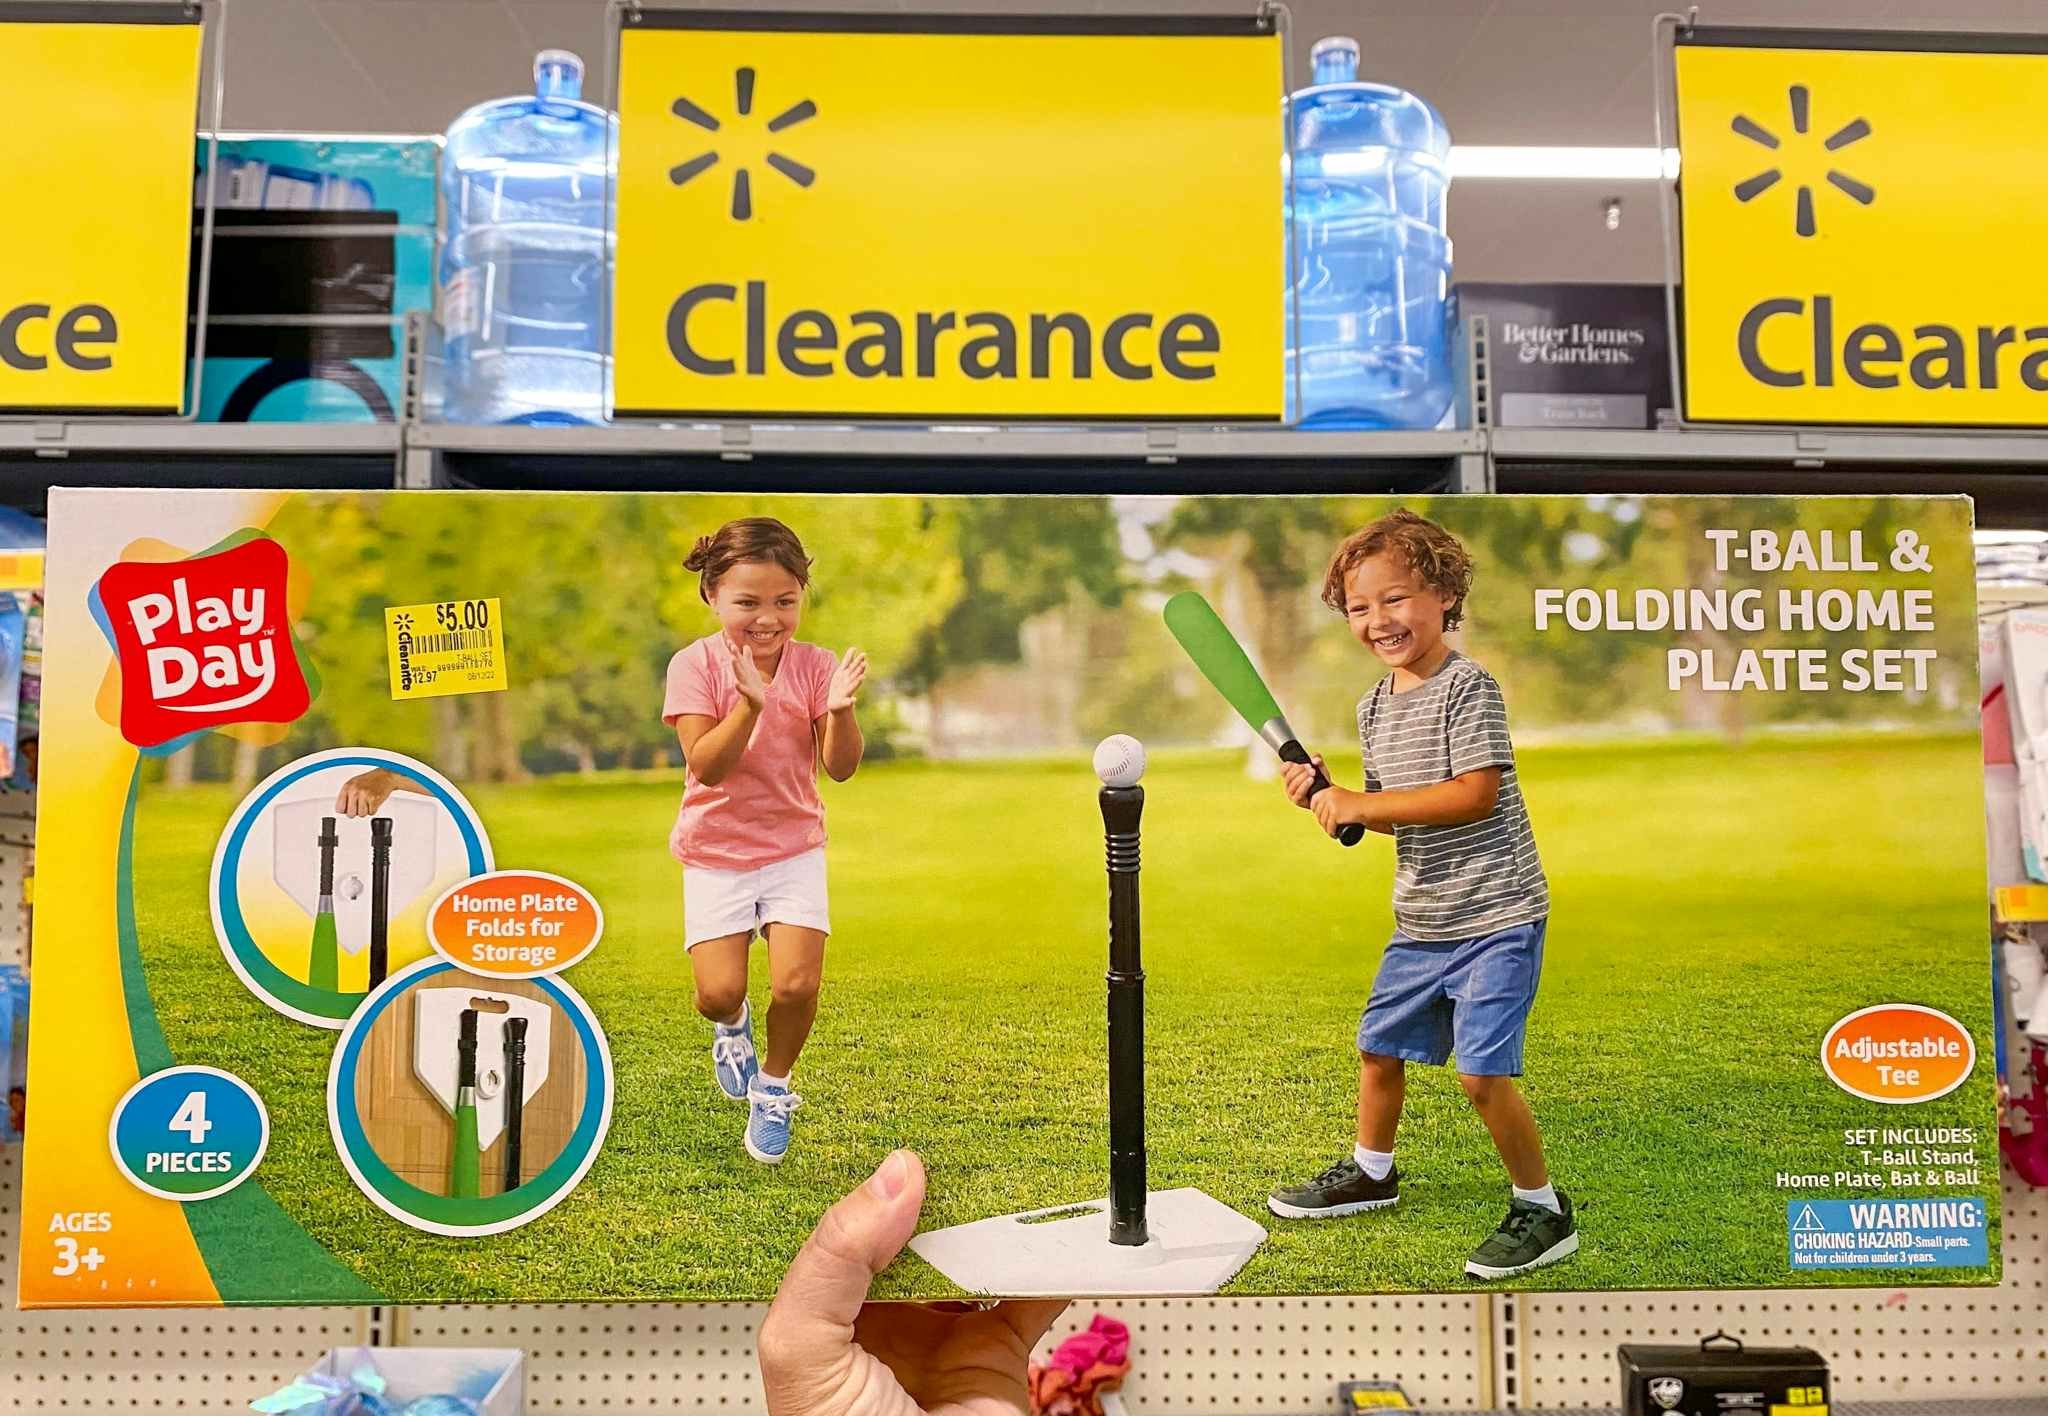 hand holding play day t-ball set in walmart clearance aisle